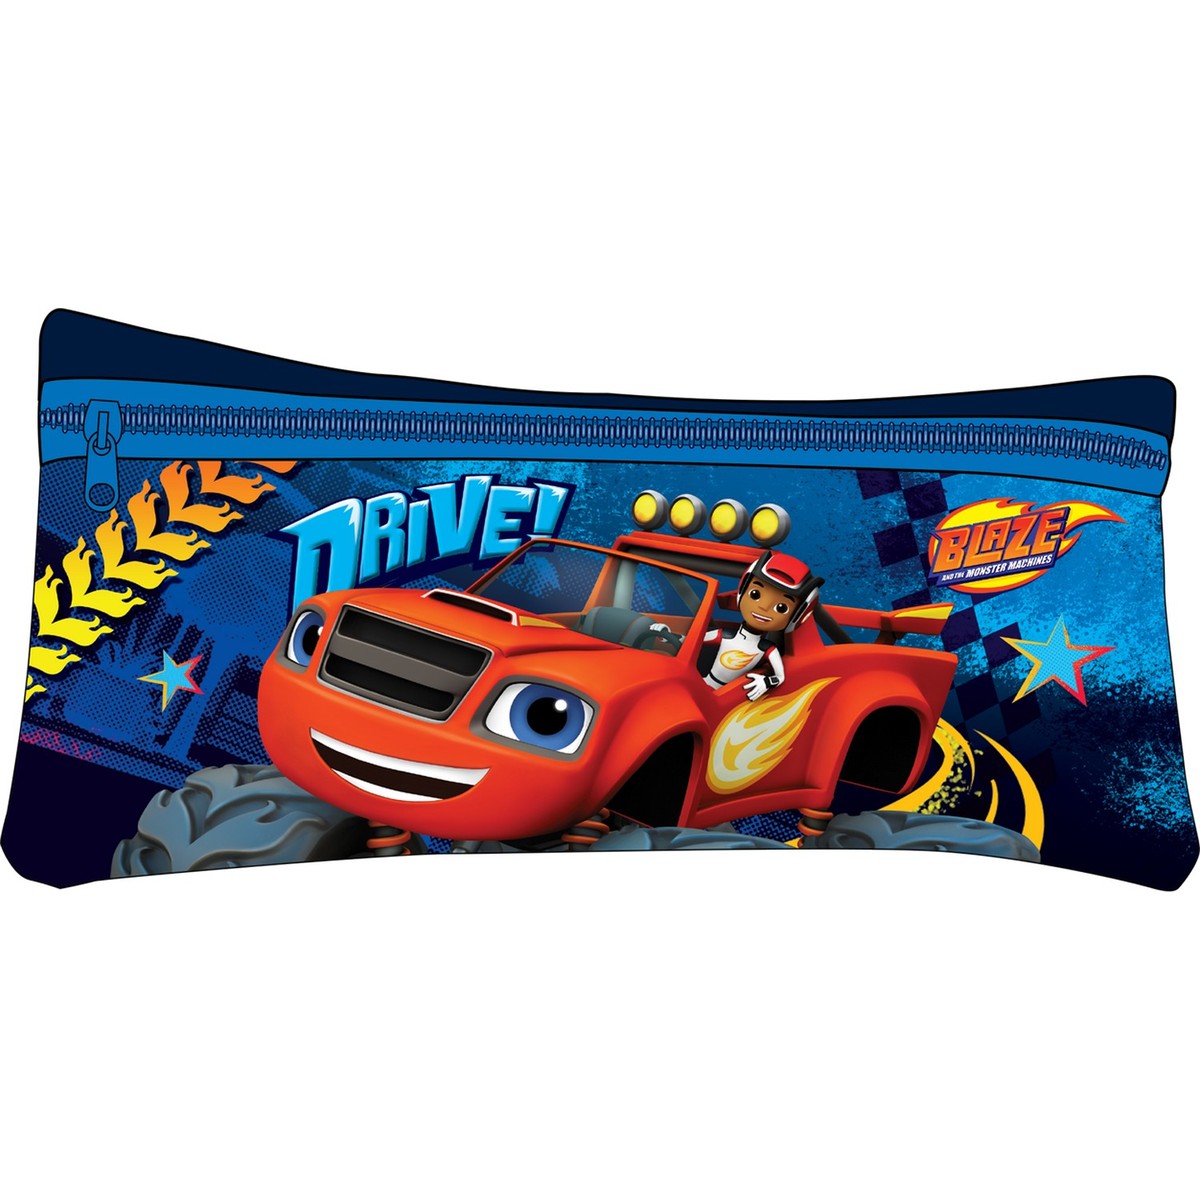 Blaze And The Monster Machines School Trolley Value Pack 12in1 Set FK-100383 16inch